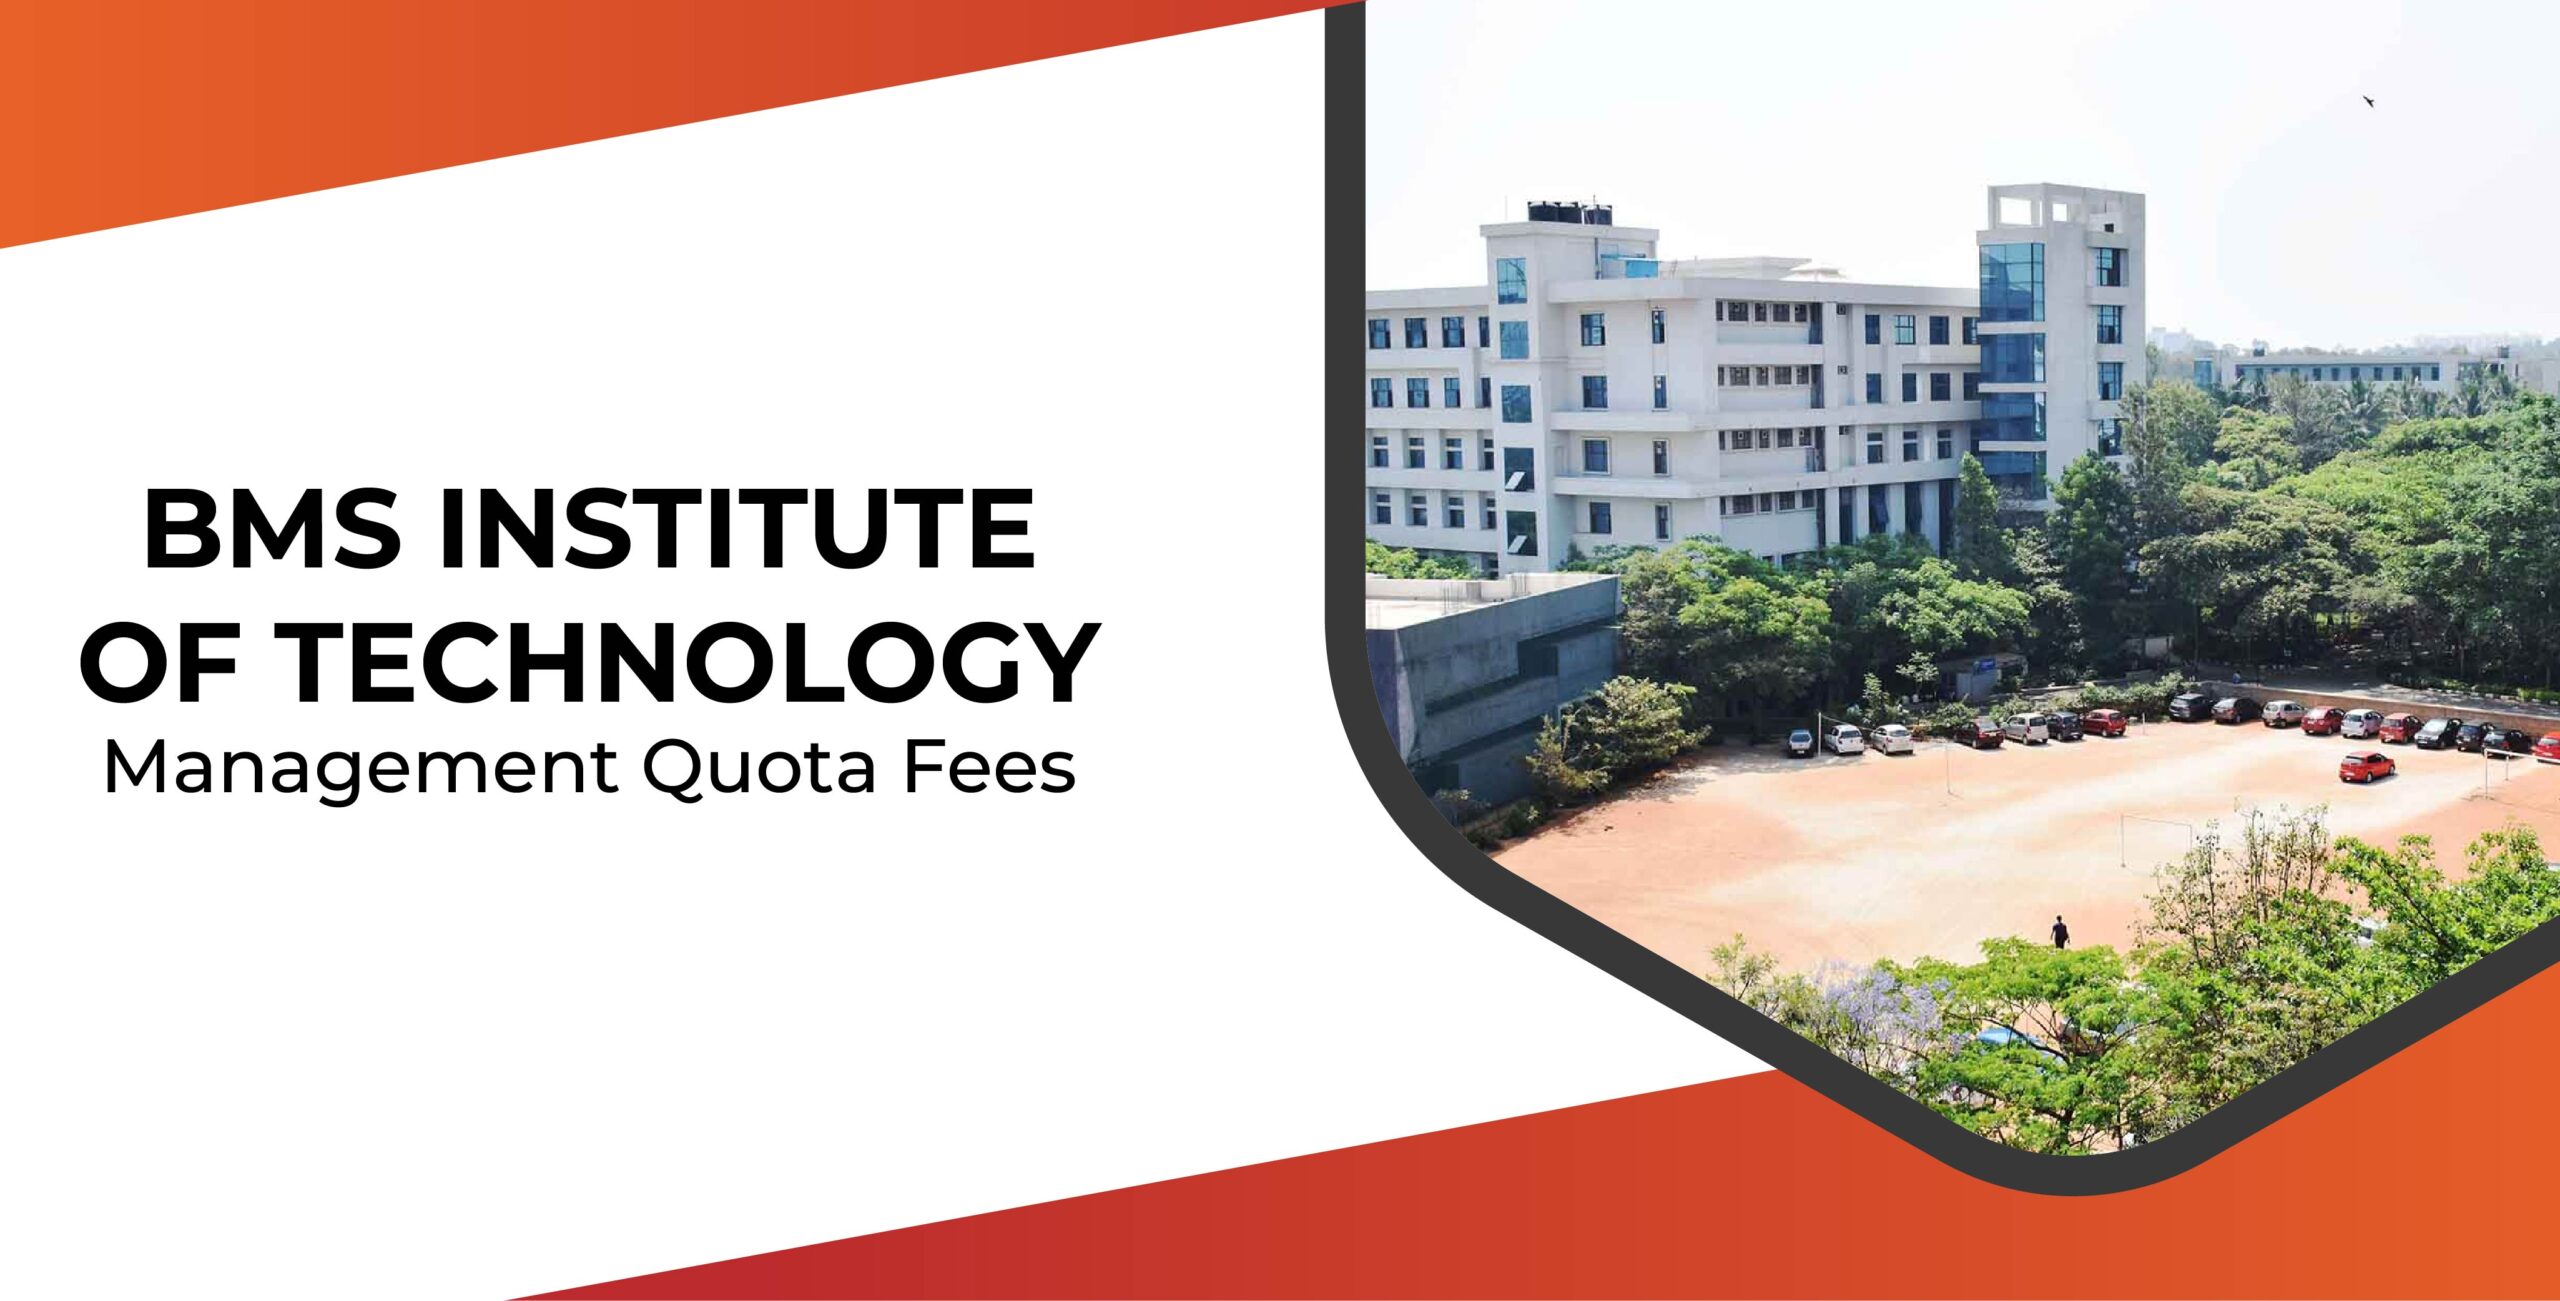 BMS Institute of Technology Management Quota Fees